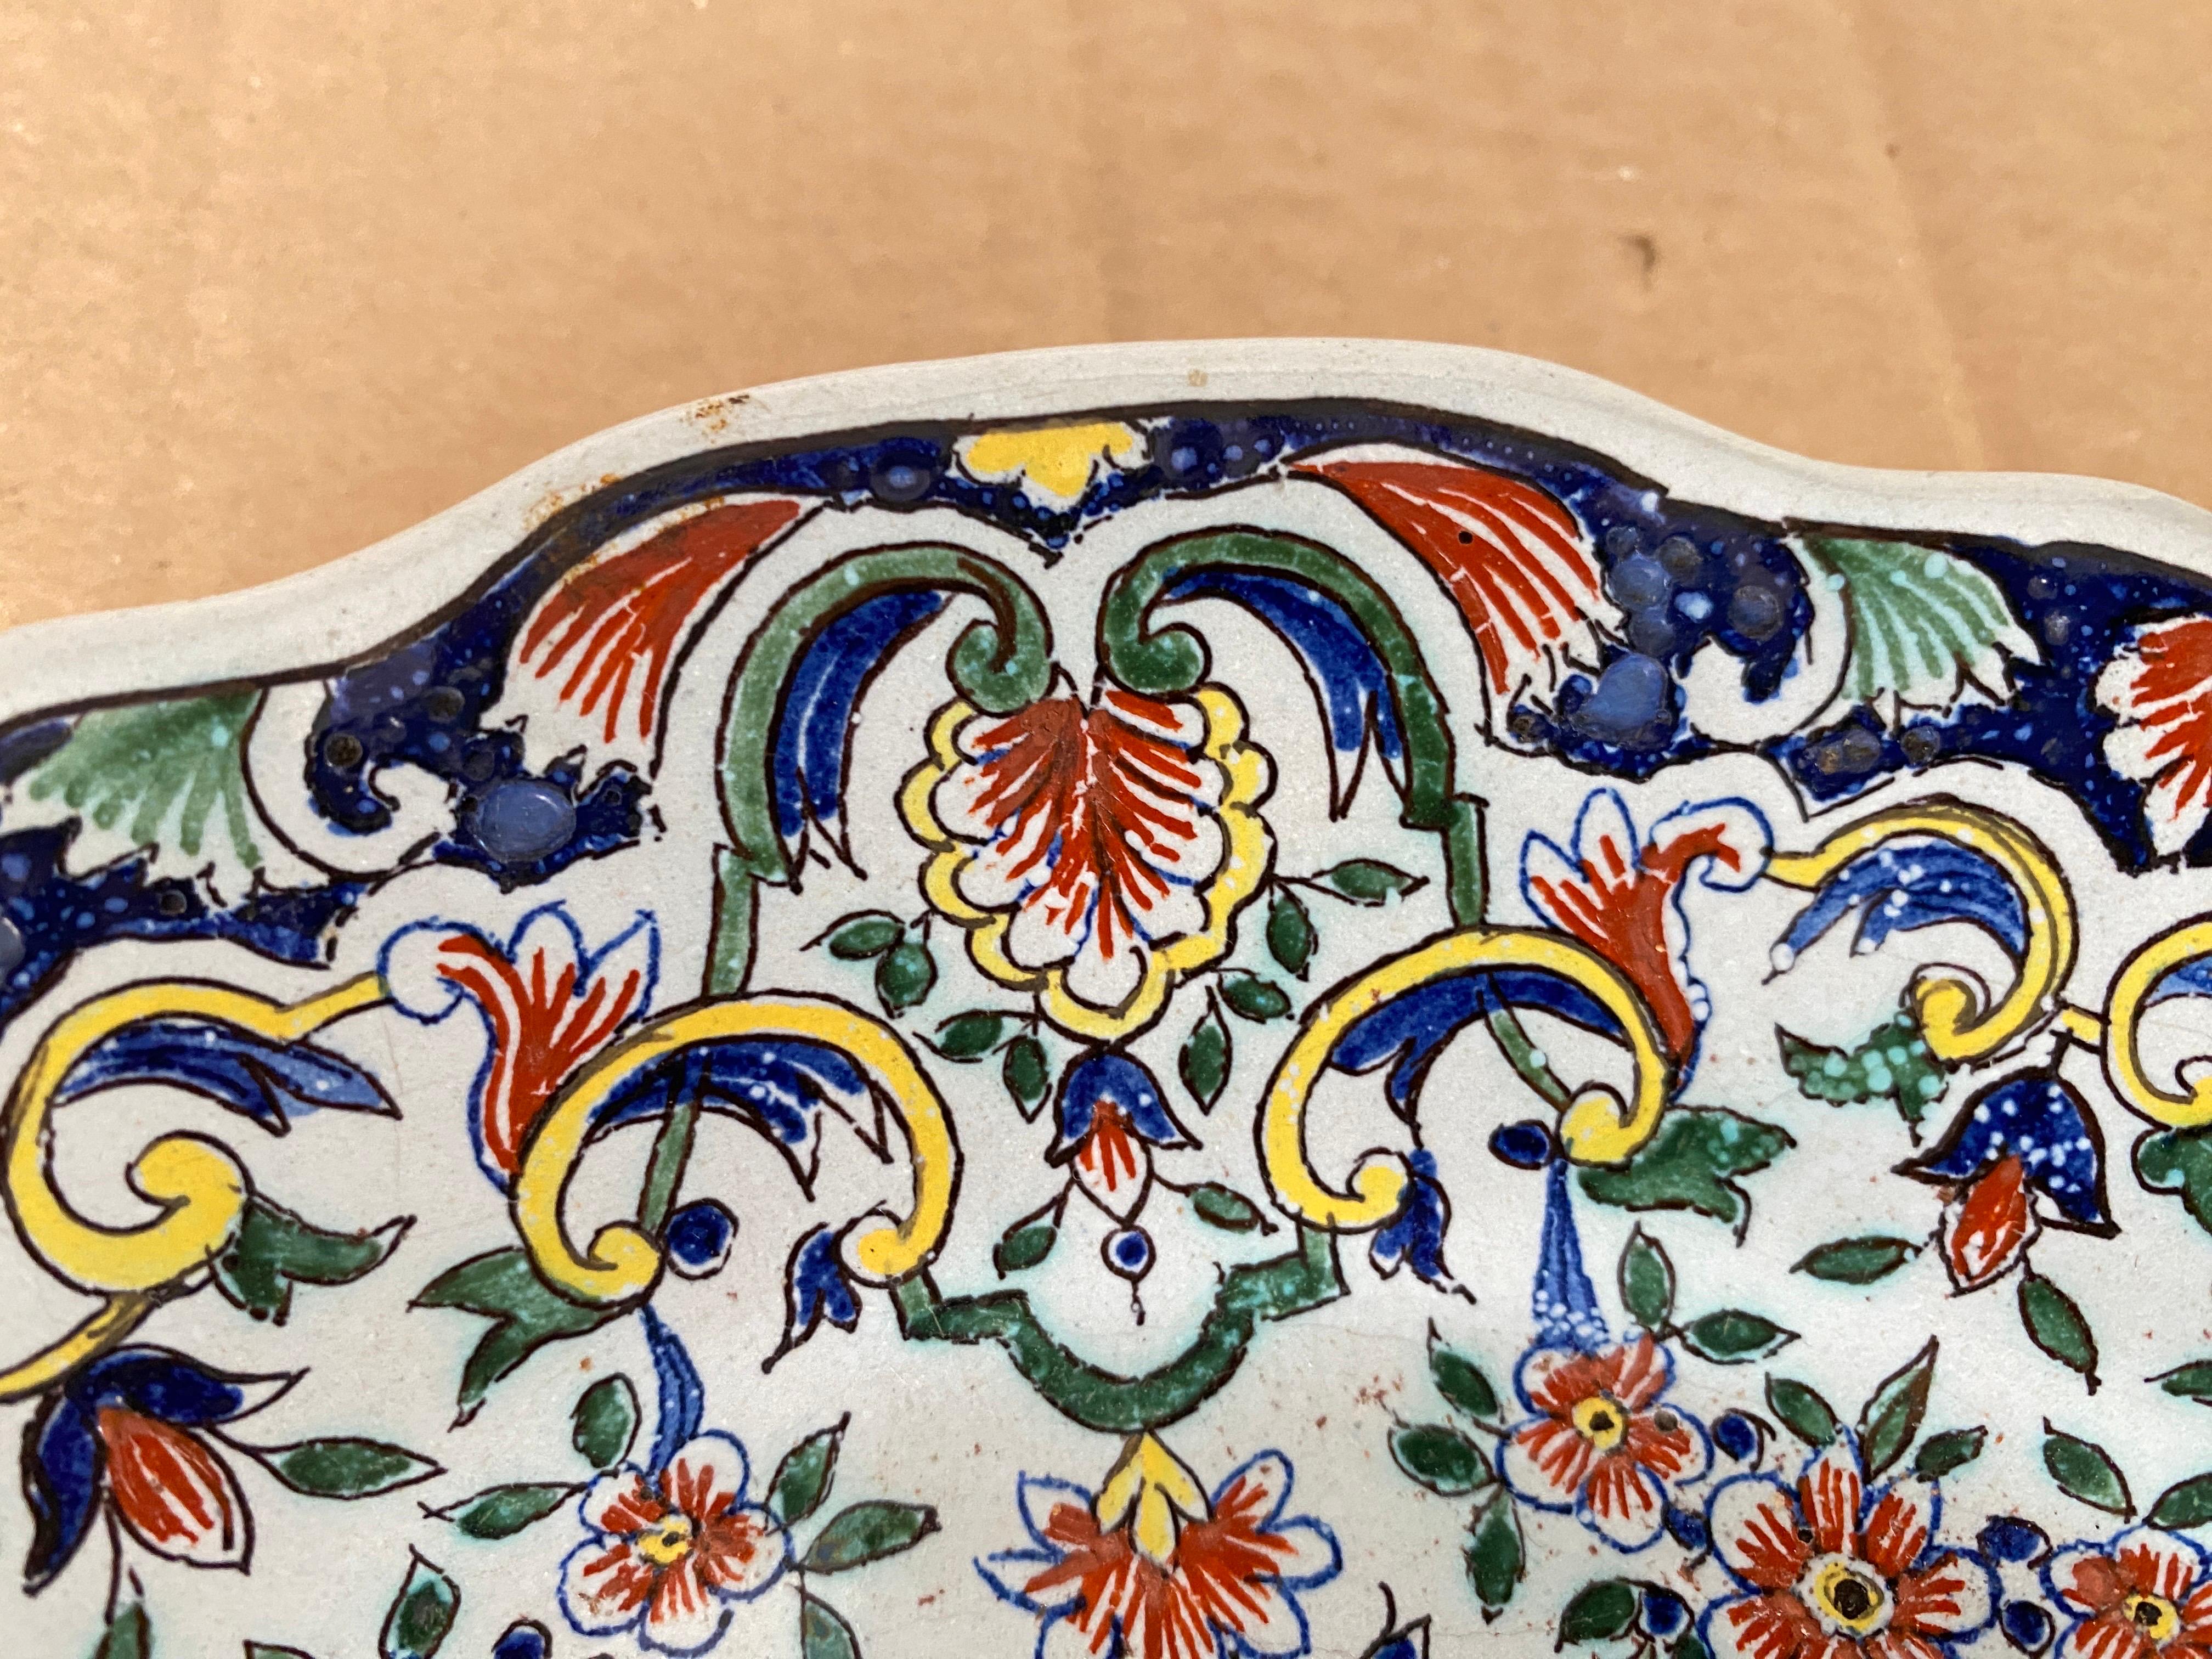 Hand-Painted French Faience  Desvres 19th Century Blue Green Emile Fourmaintraux Signed For Sale